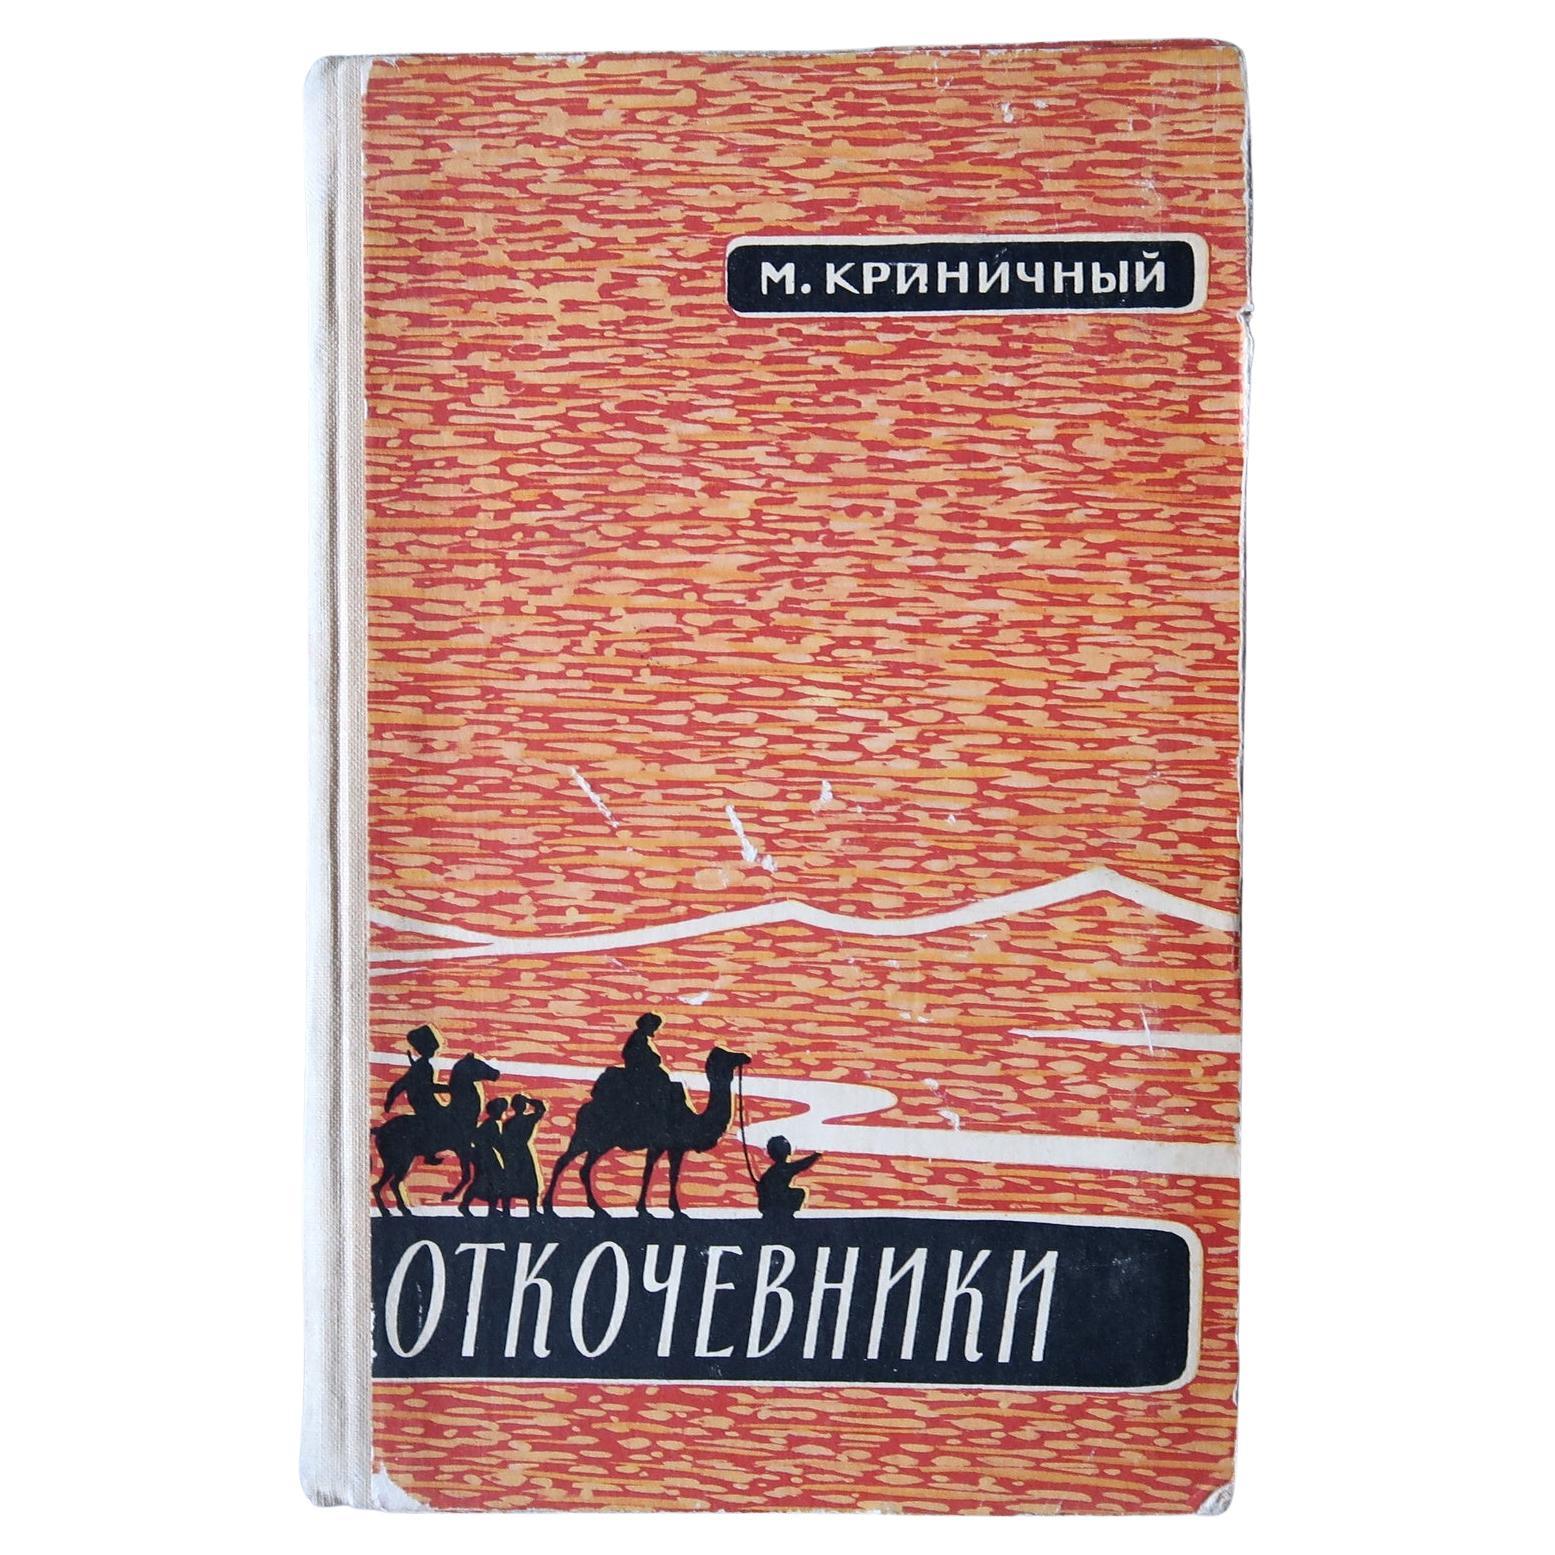 Vintage USSR Book: 'Nomads' by K. Kripichny - A Rare Gem from 1963, 1J126